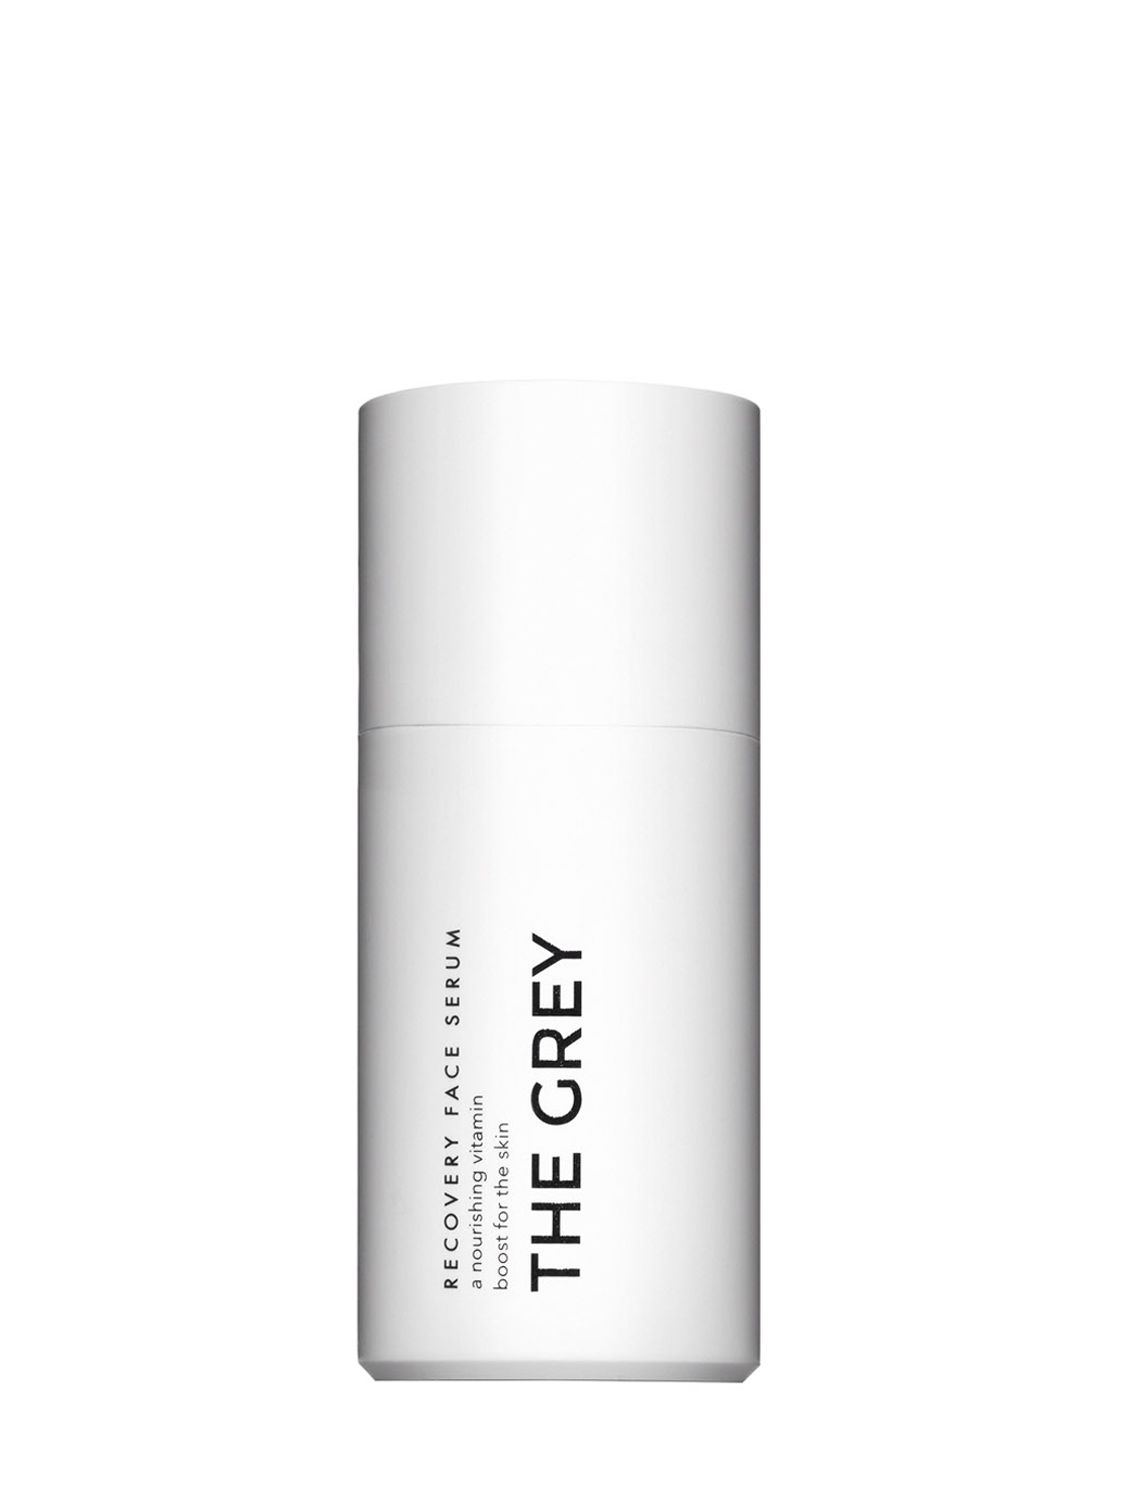  The Grey Men's Skincare 30ml Recovery Face Serum 